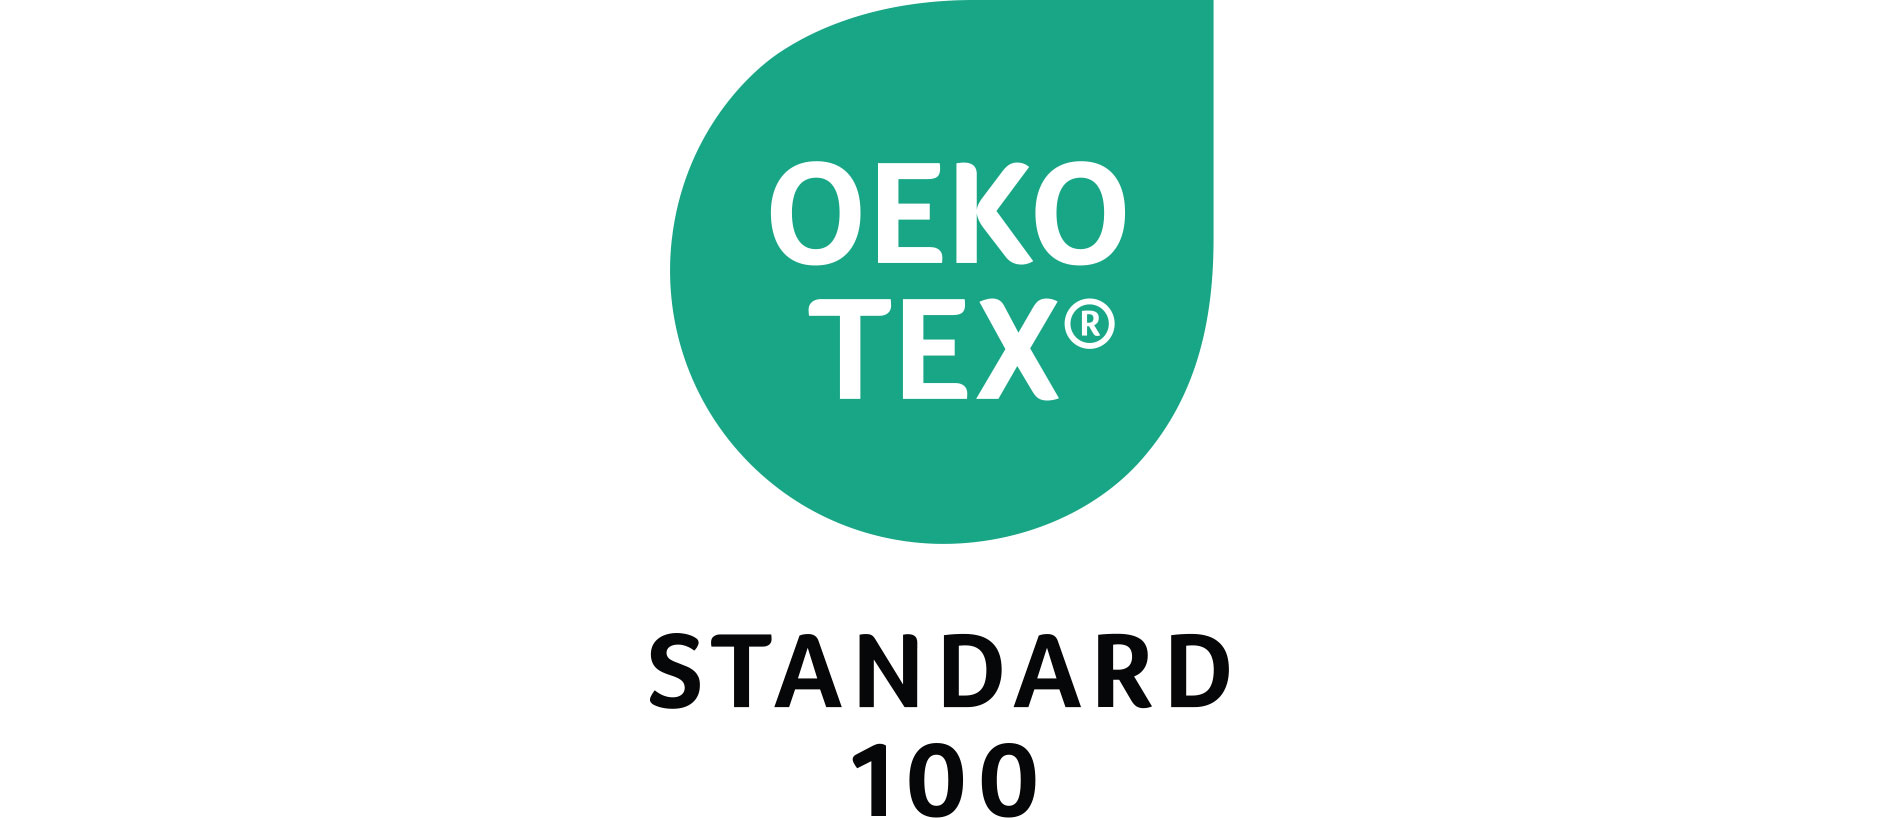 How to: STANDARD 100 by OEKO-TEX® Application & Certification Process 